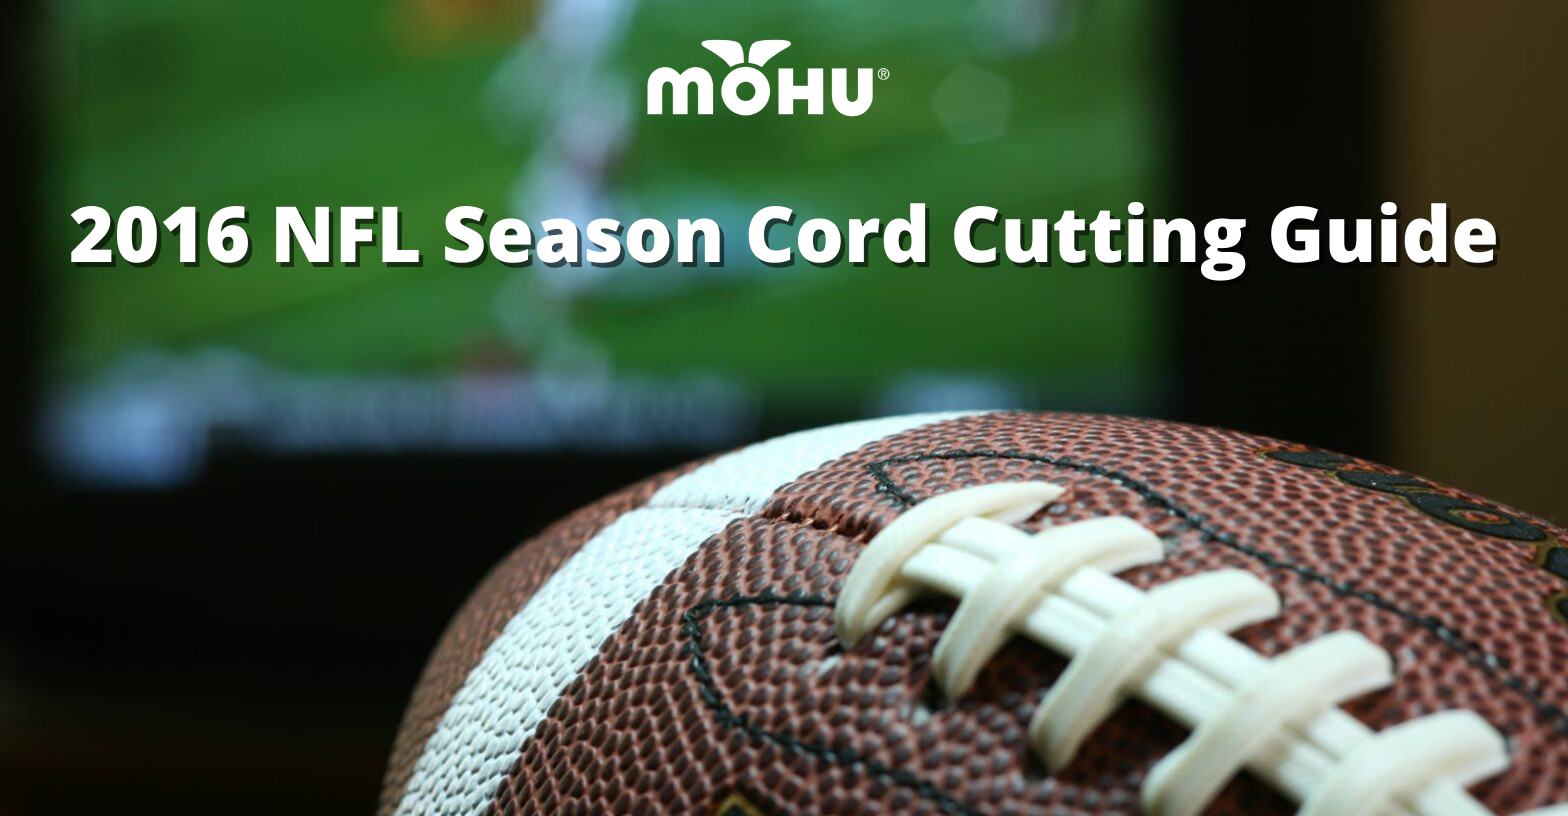 Football in front of TV Screen, 2016 NFL Season Cord Cutting Guide with Mohu logo